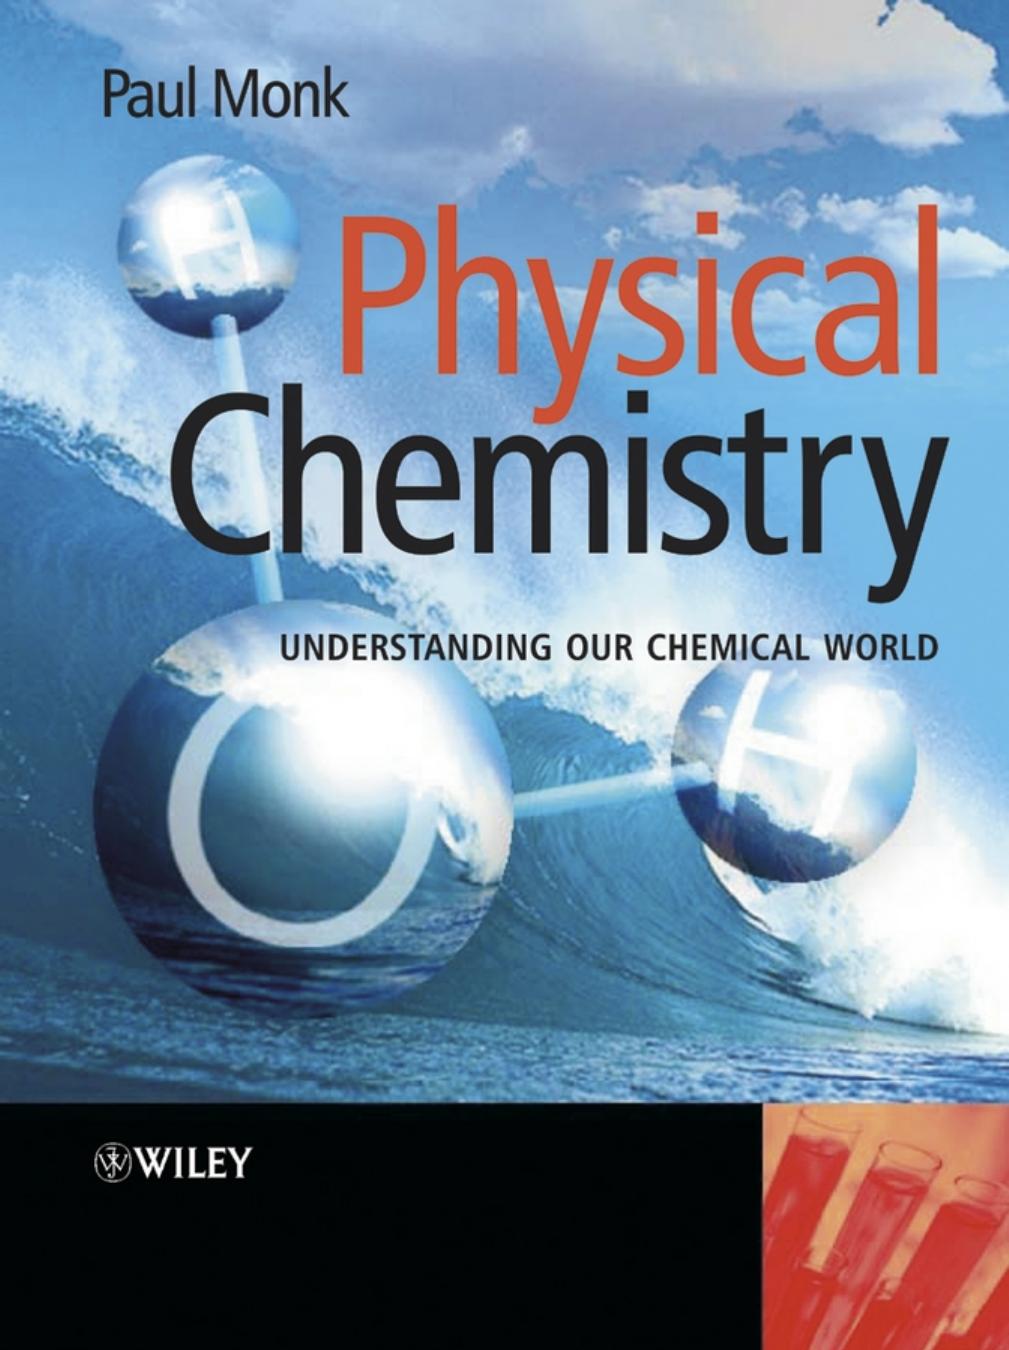 Physical chemistry  understanding our chemical world 2004.pdf